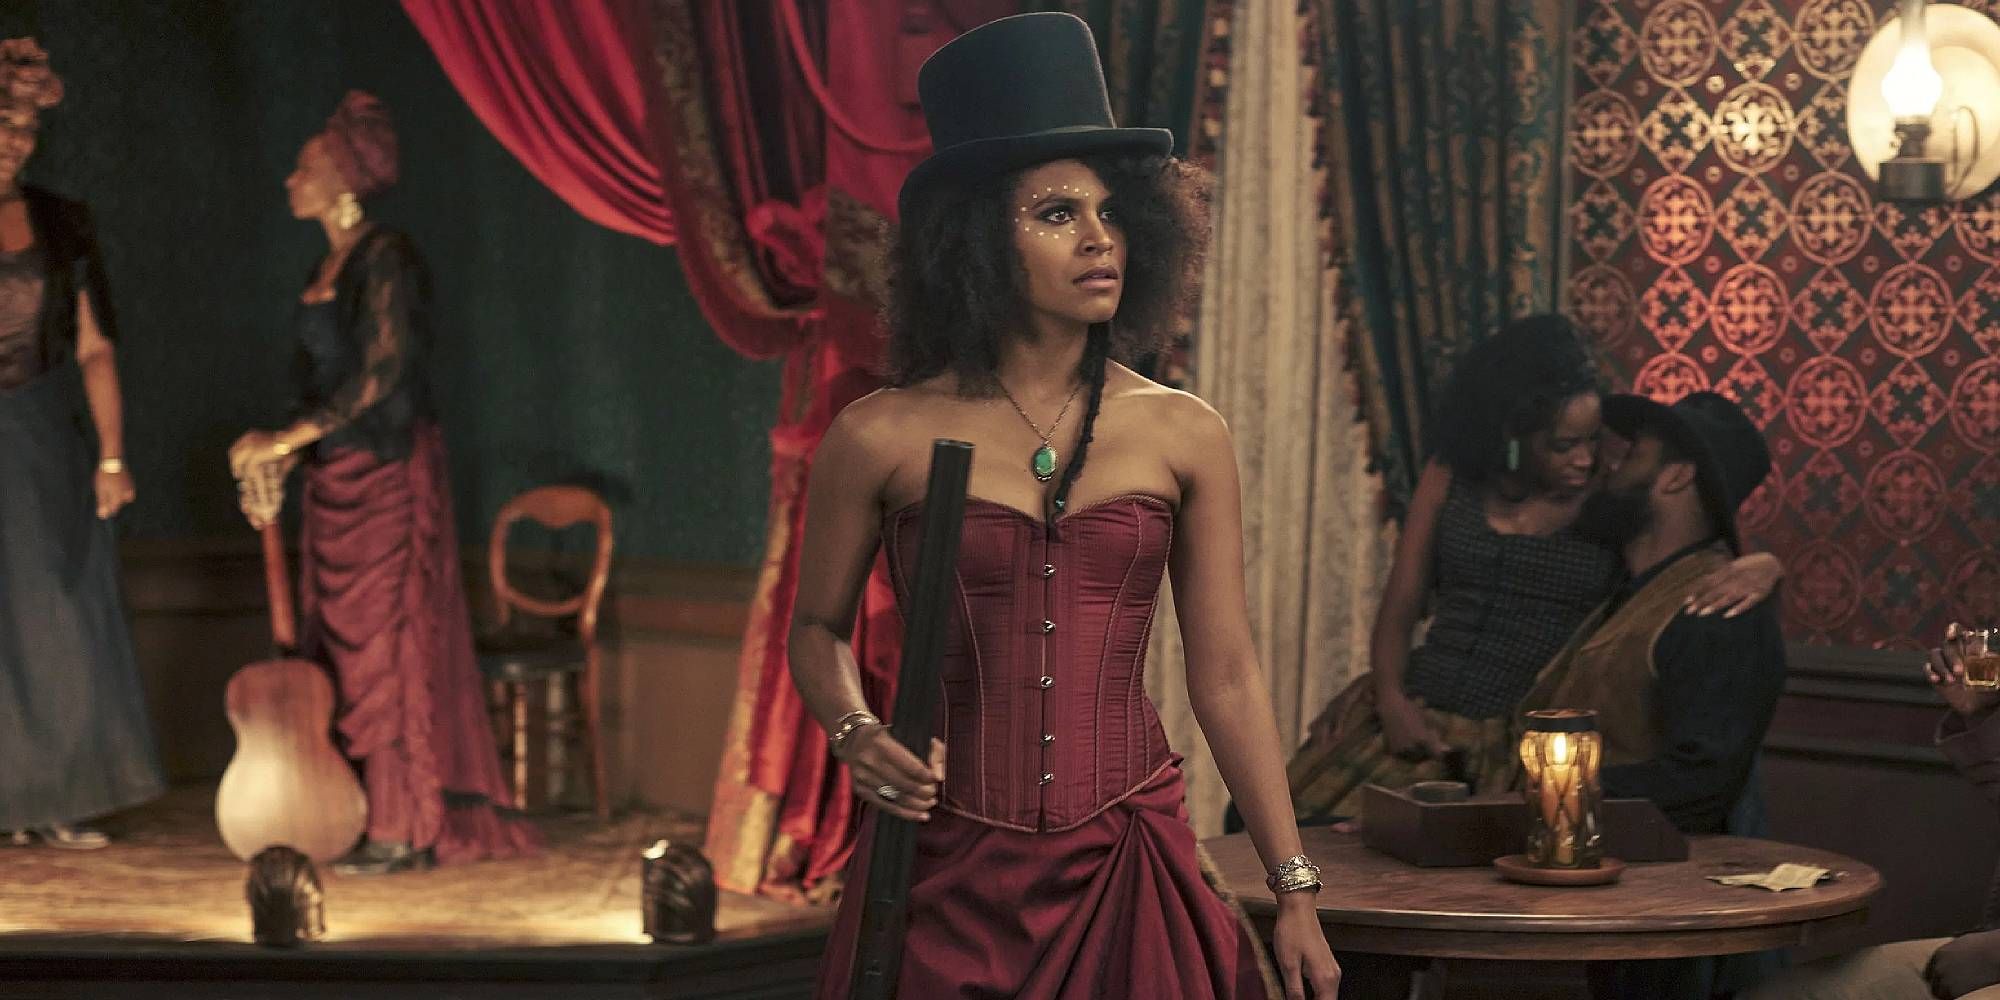 Zazie Beetz in The Harder They Fall holding a gun and wearing a red dress.